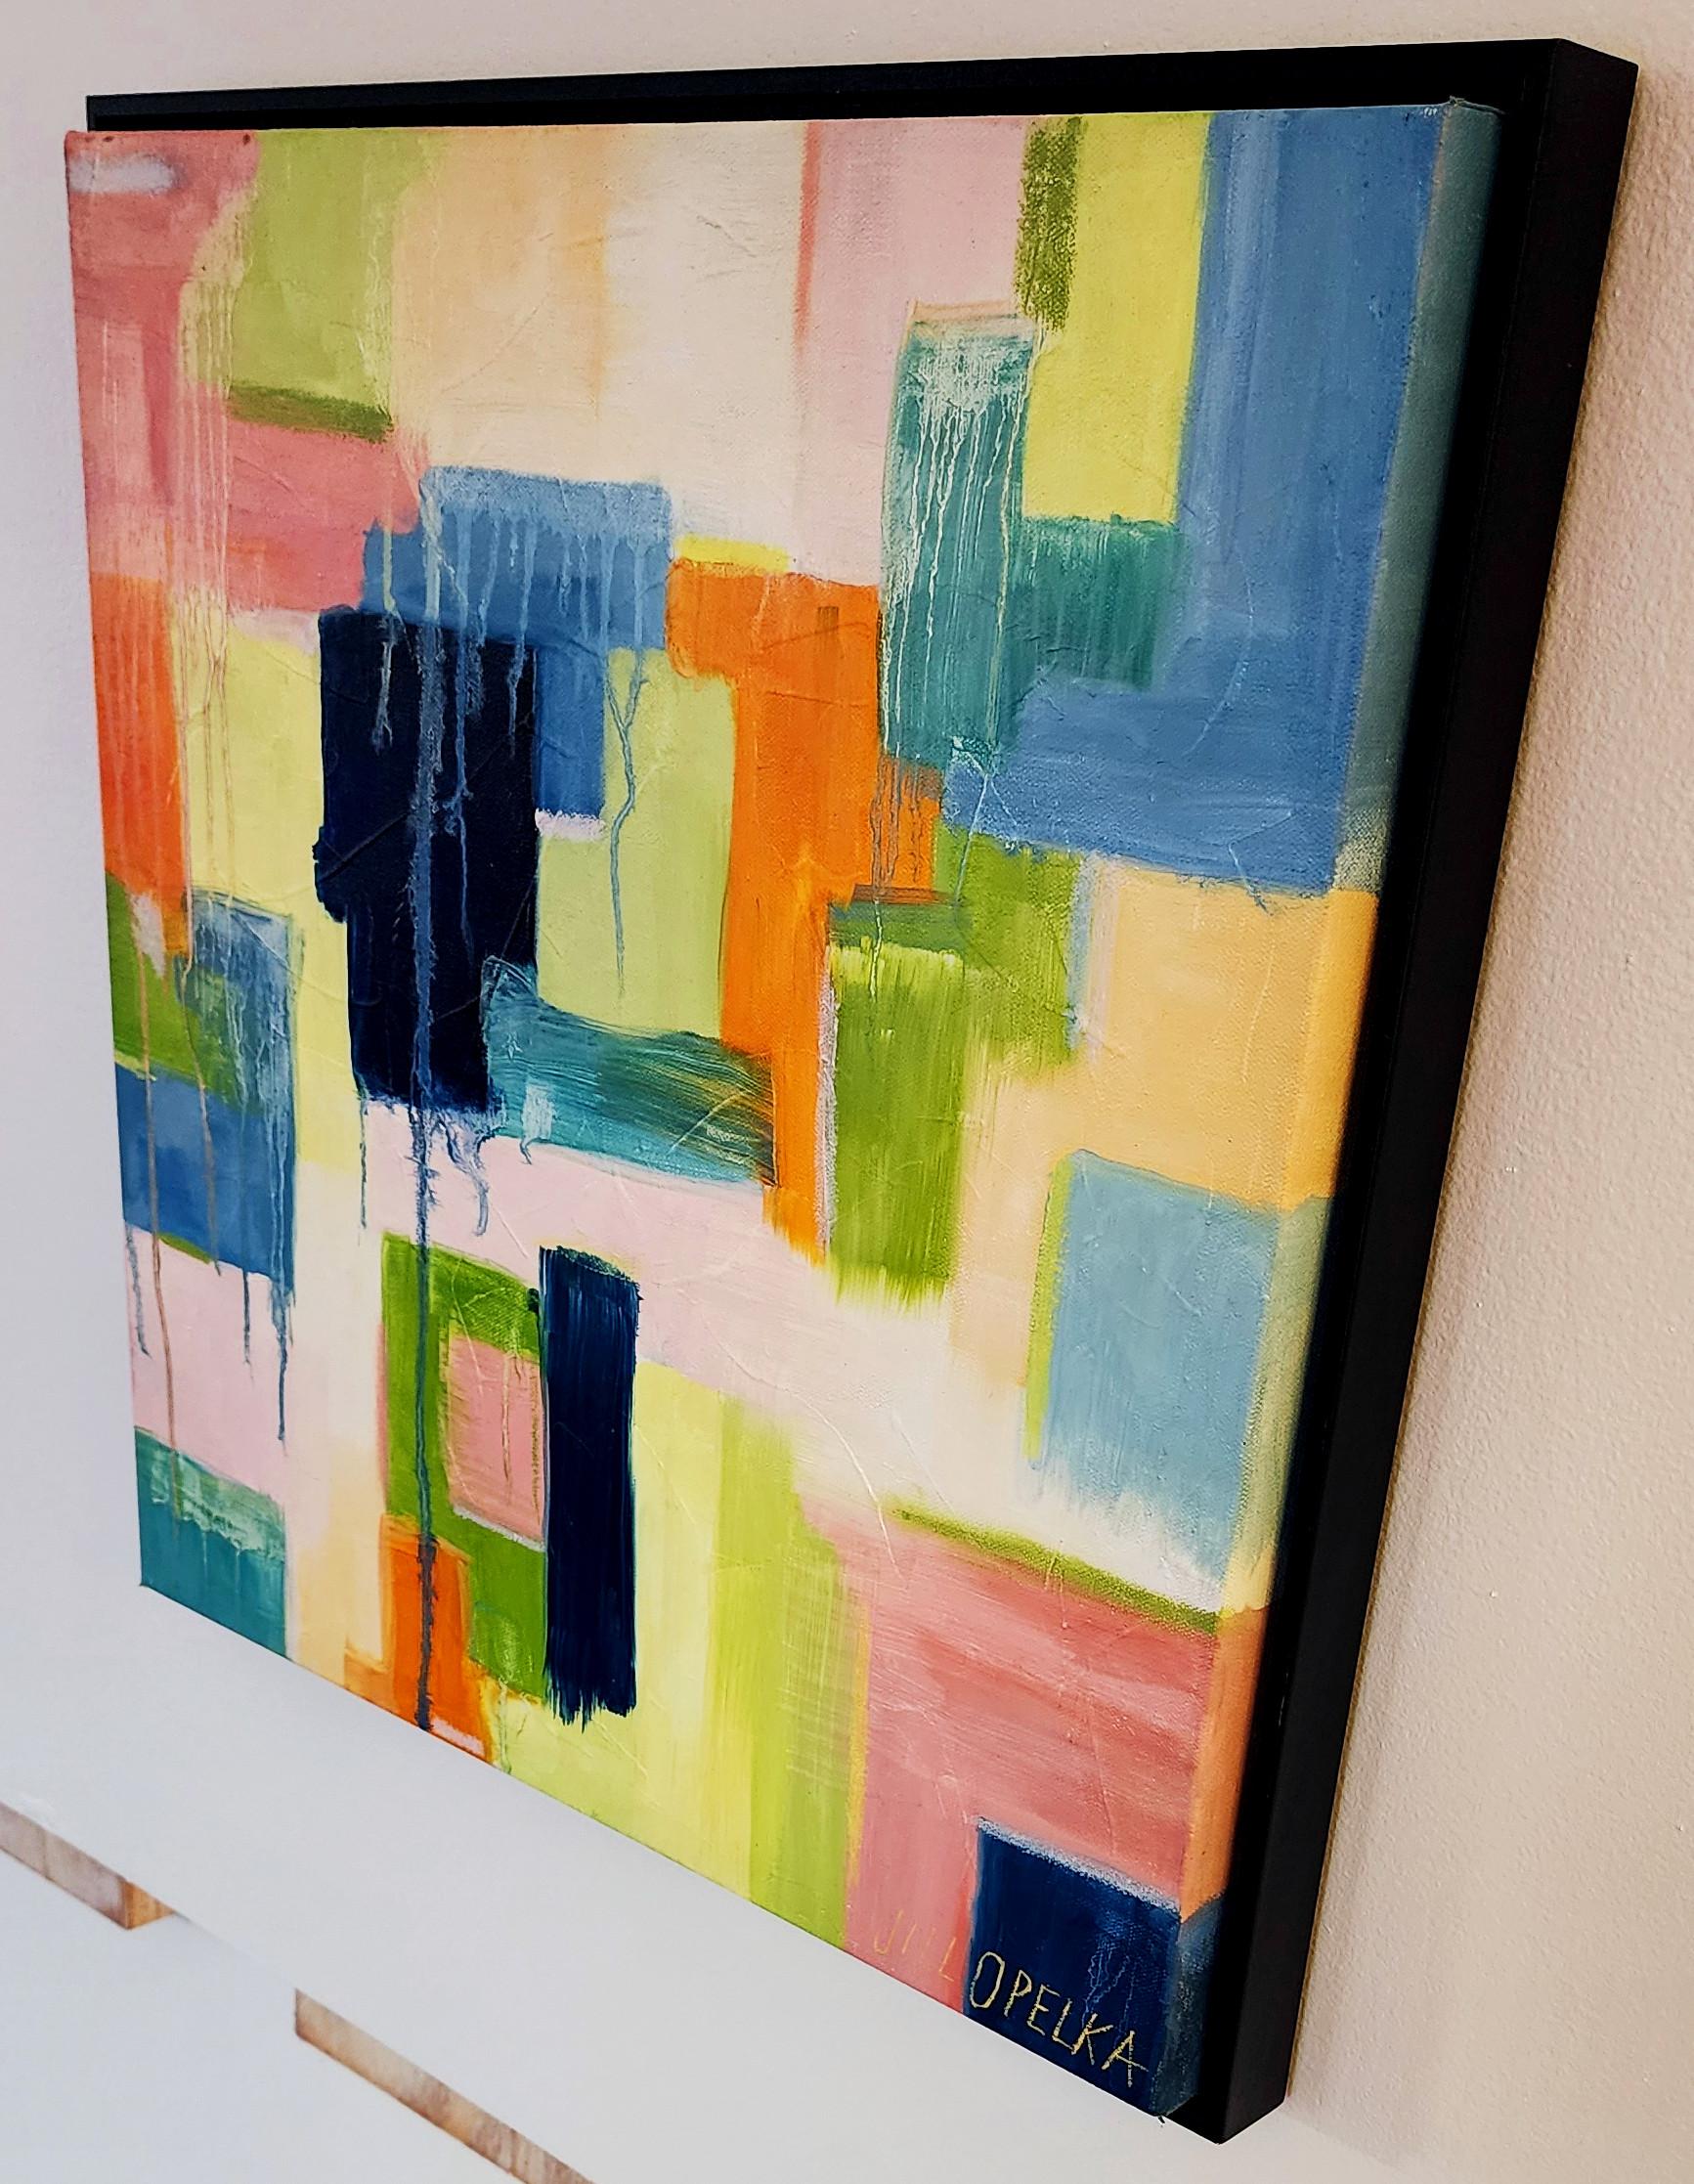 Abstract IV (Abstract, Vibrant, Deep, Blue, Navy, Green, Orange, Pink, 30% OFF) - Abstract Geometric Painting by Jill Opelka